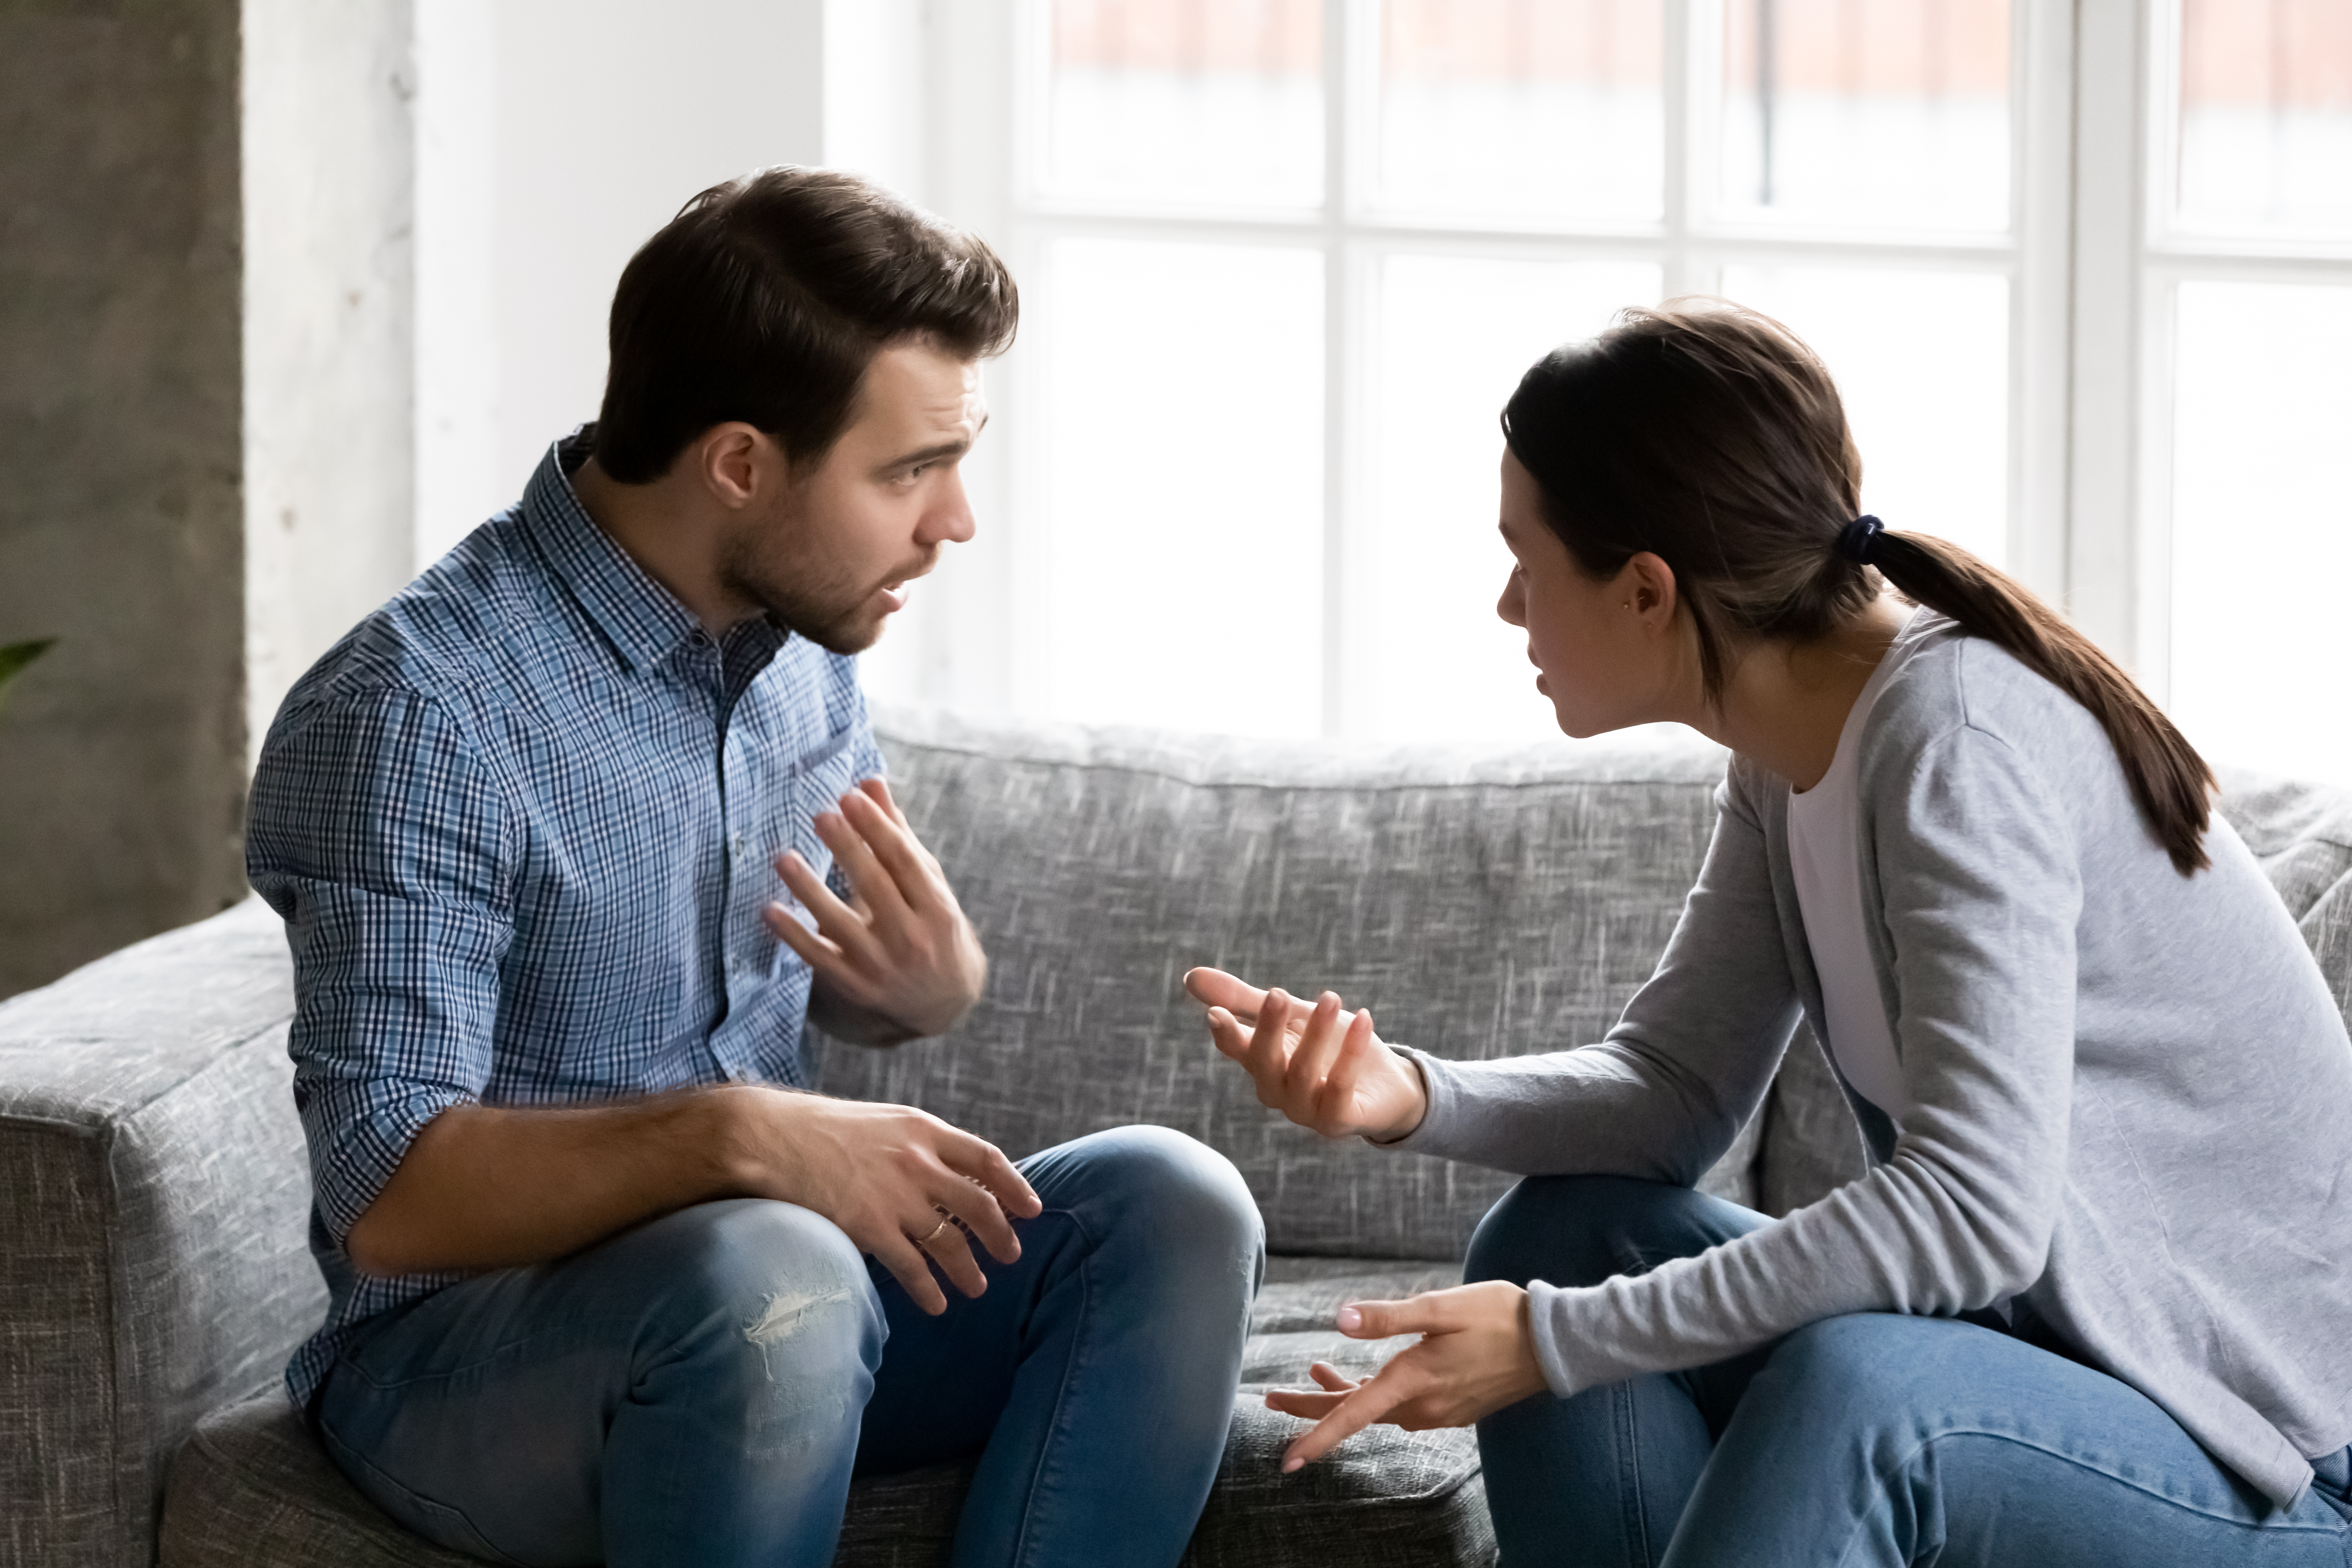 A young couple having an argument | Source: Shutterstock